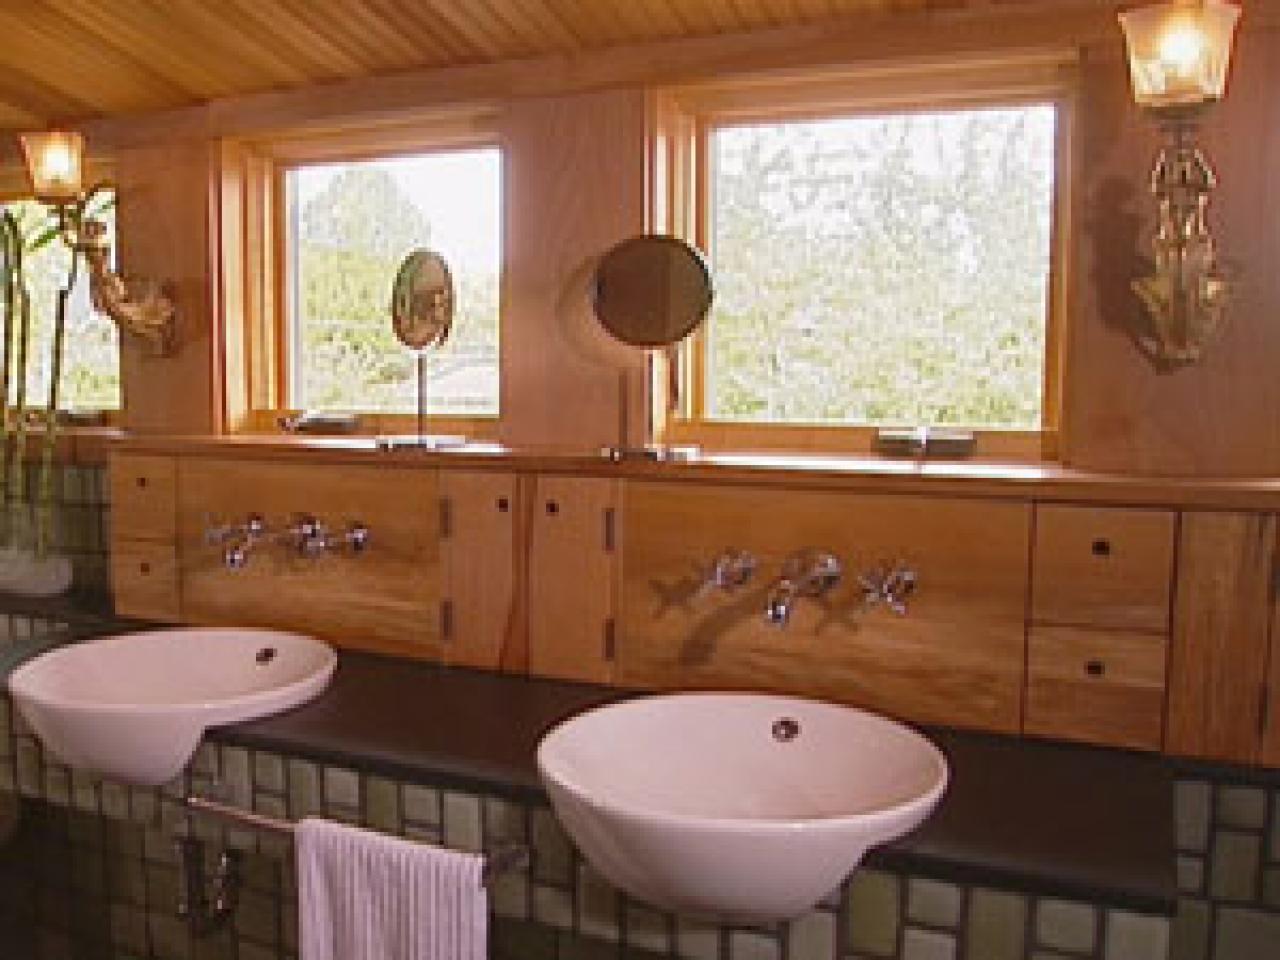 5 Simple Ways To Go Green In The Bath HGTV